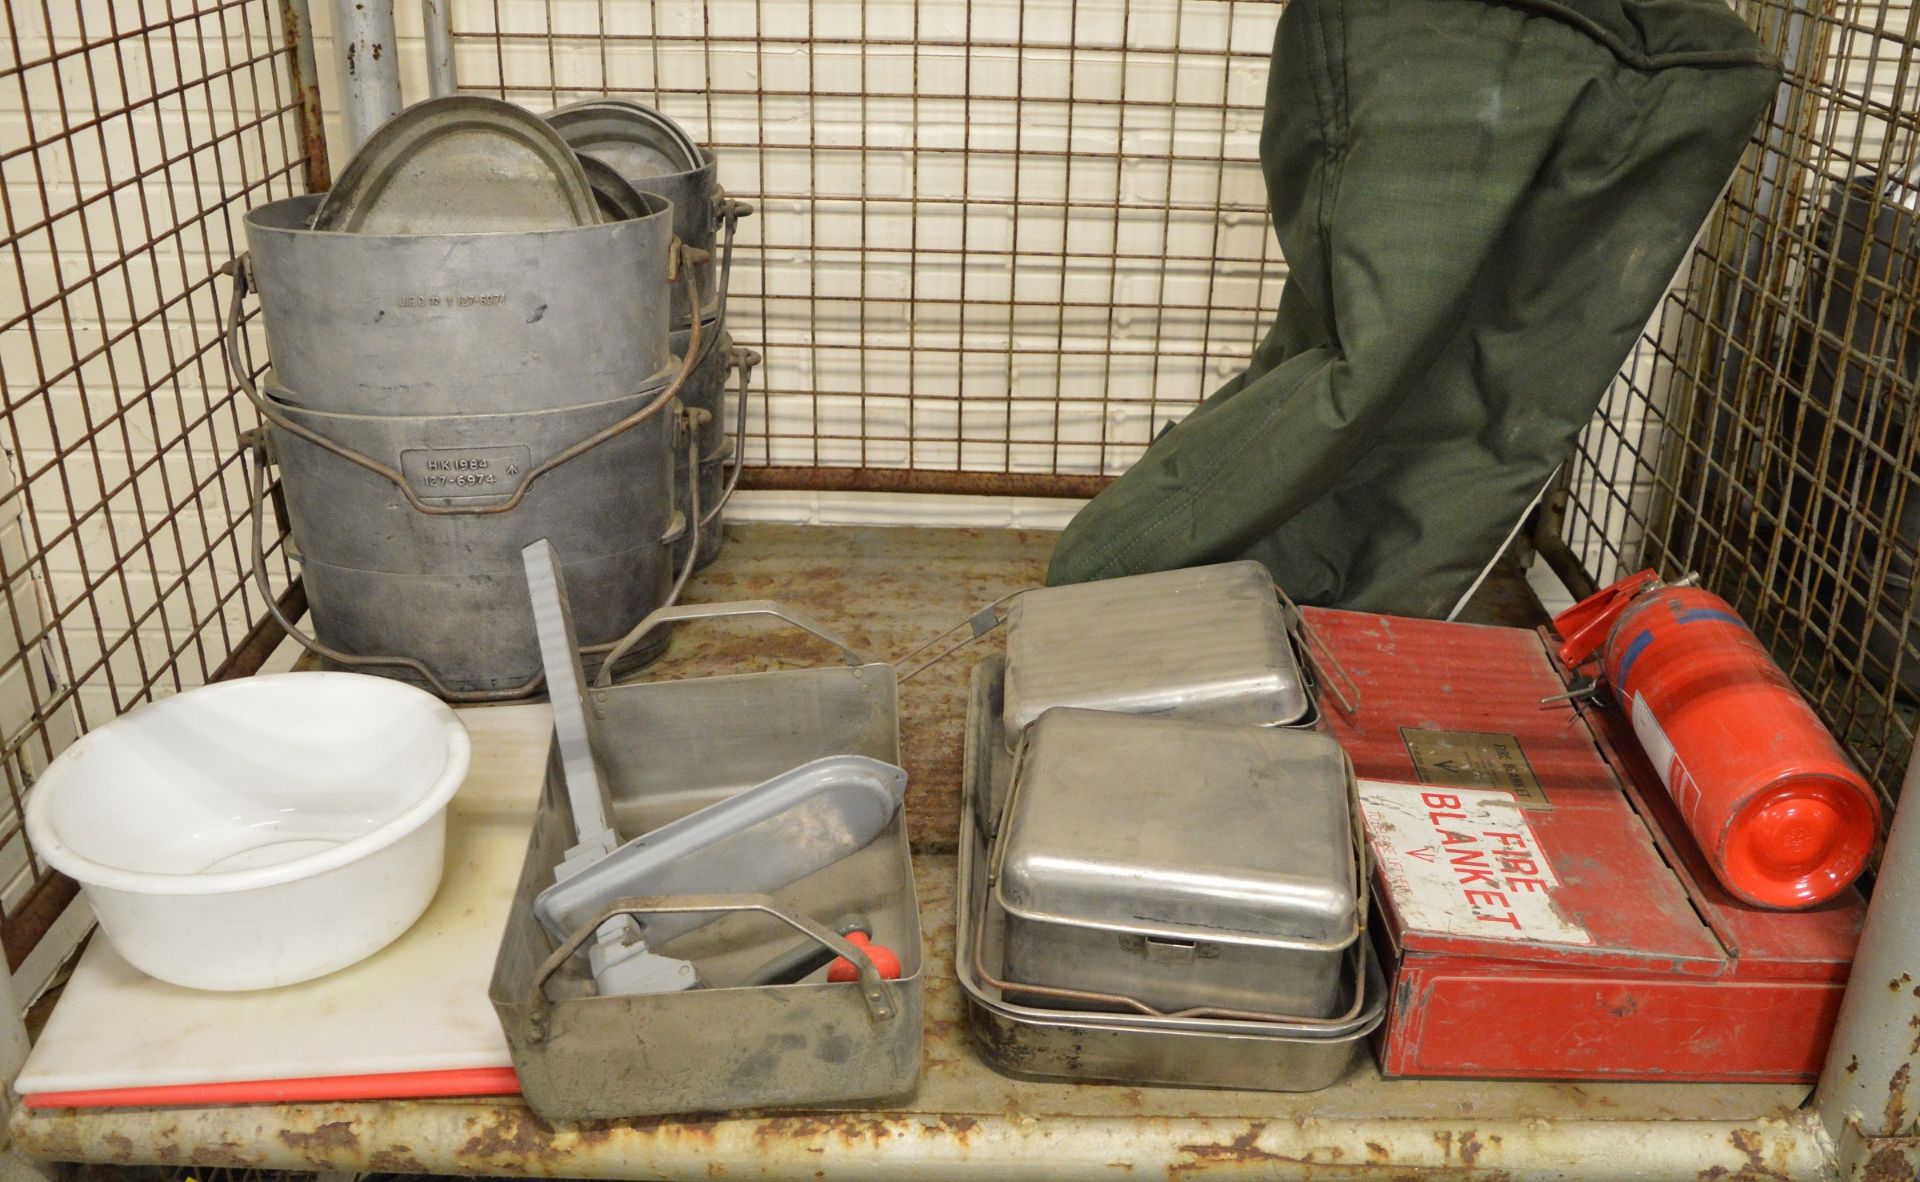 Field Catering Kit - Cooker. Oven, Utensils in storage box, pots, pans, fire blanket box - Image 2 of 6